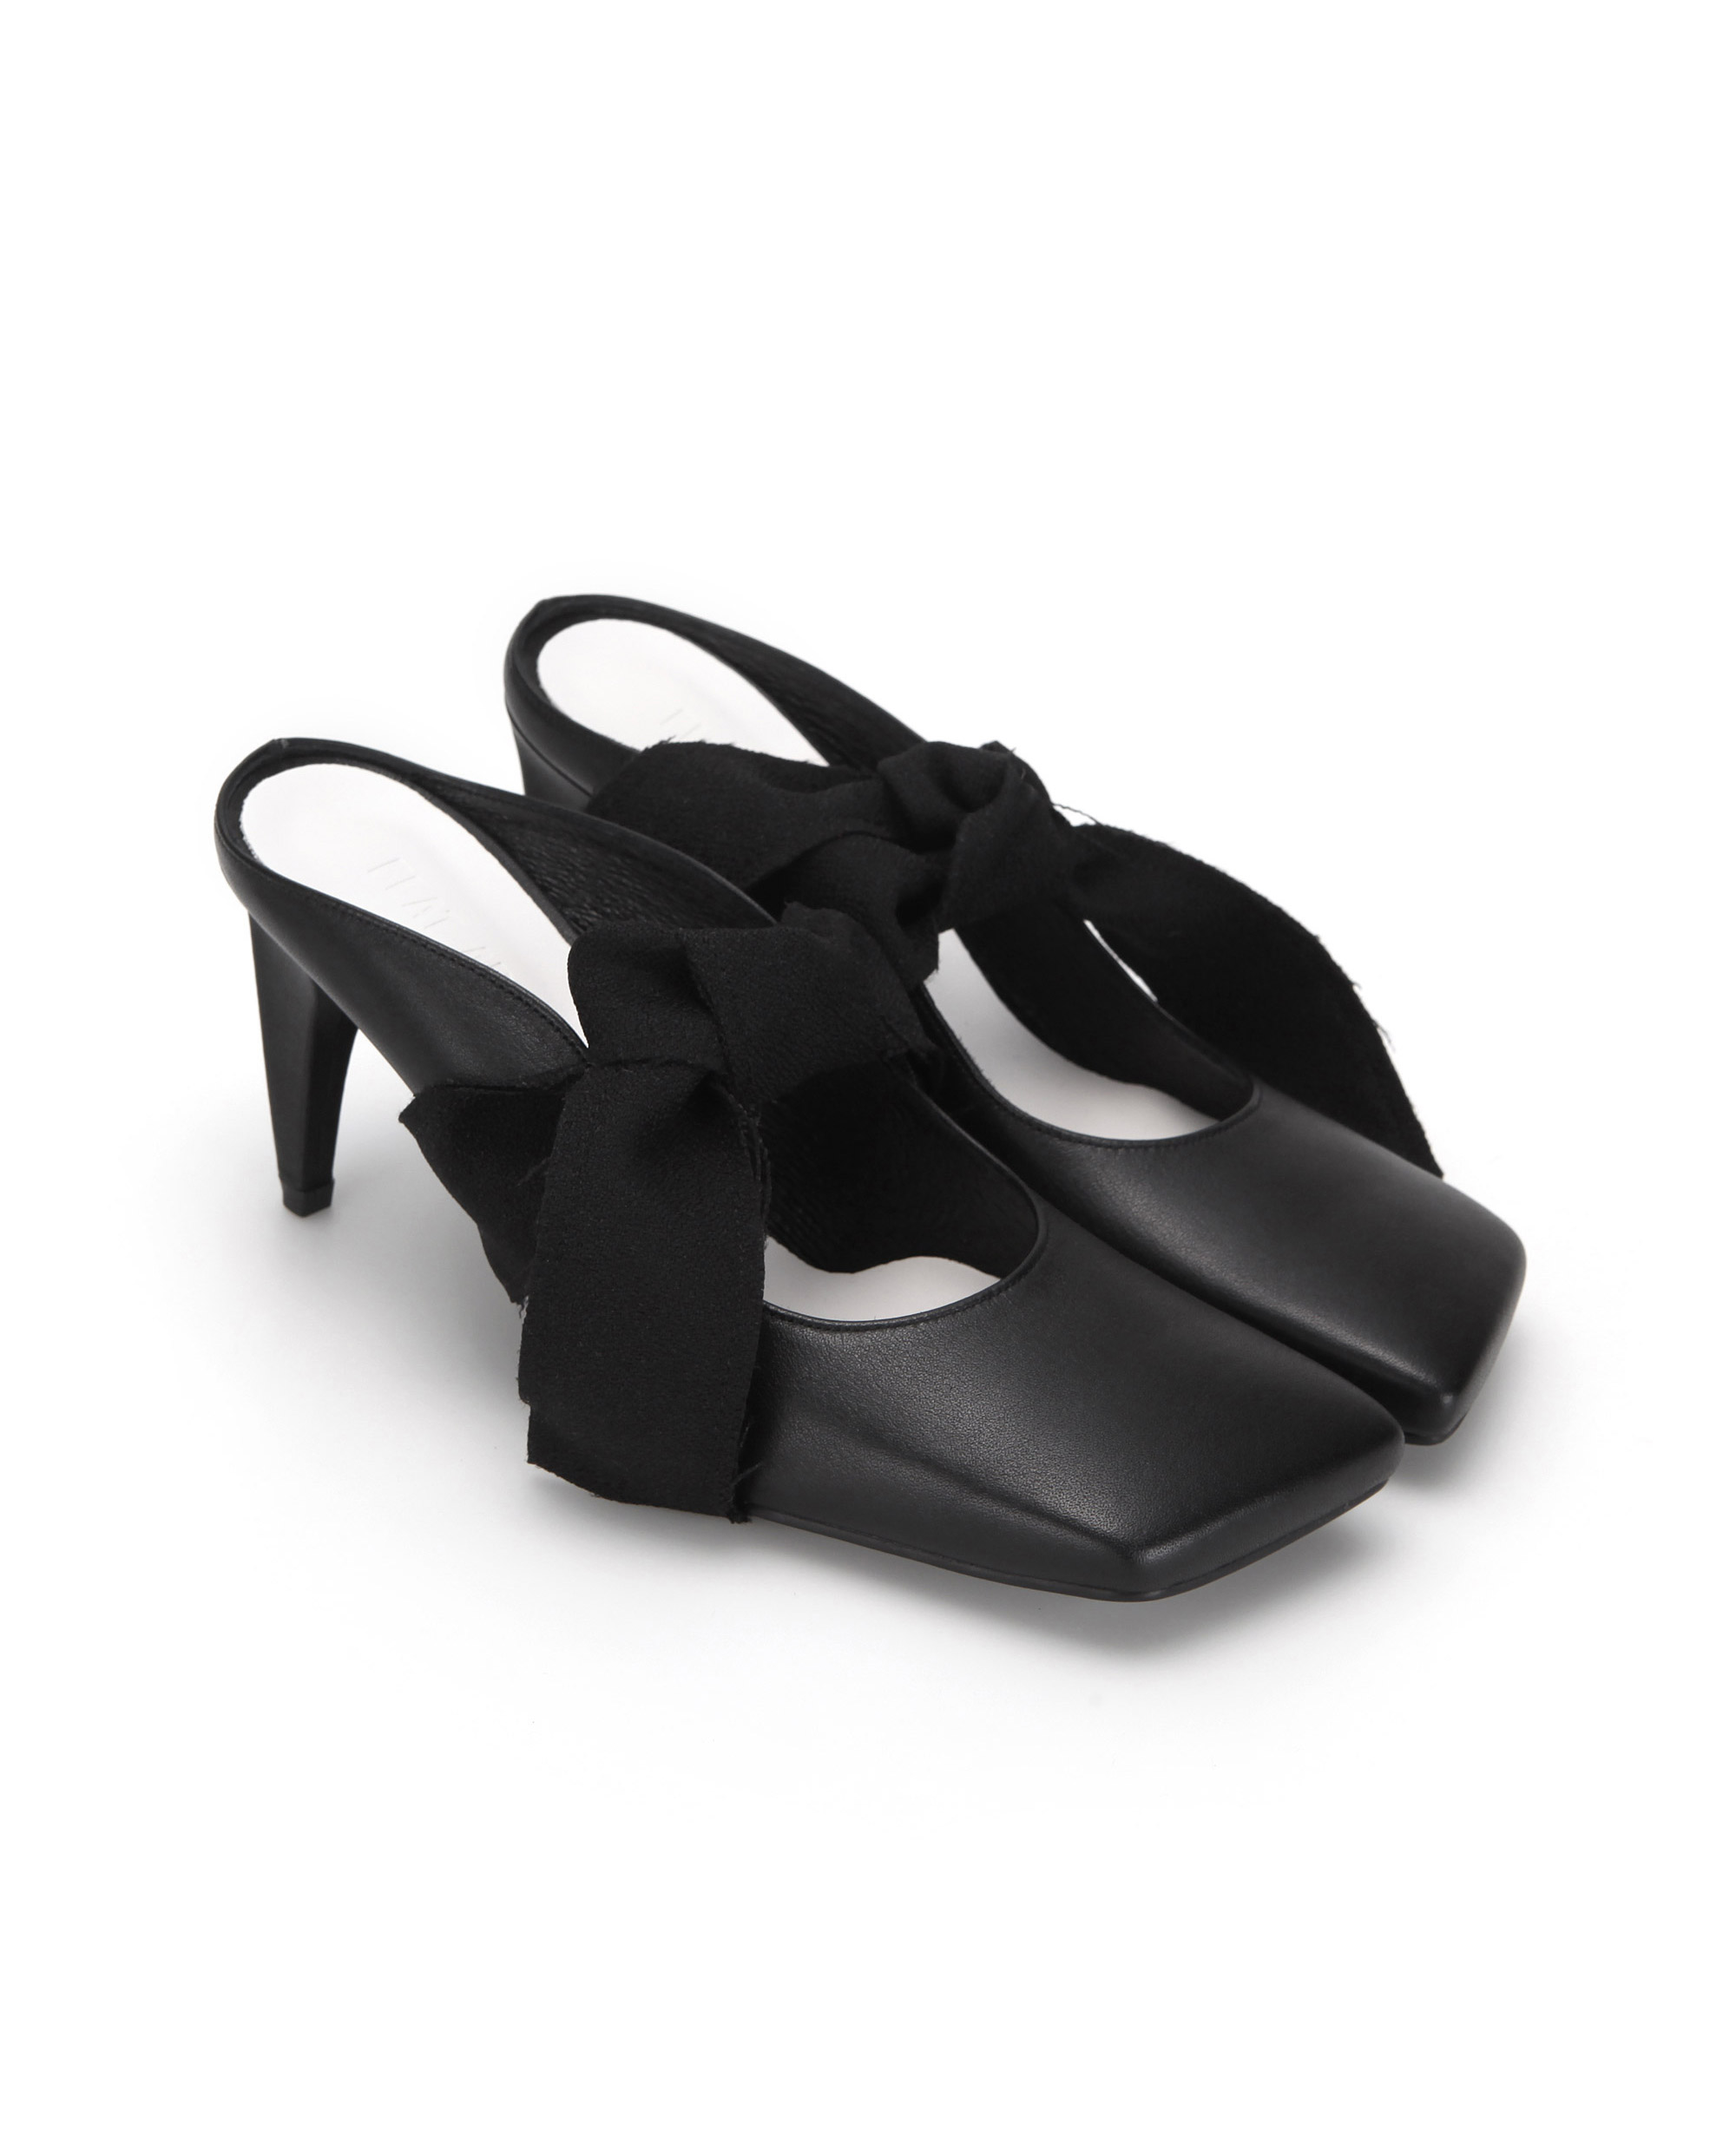 Squared toe mule with removable front ties | Black